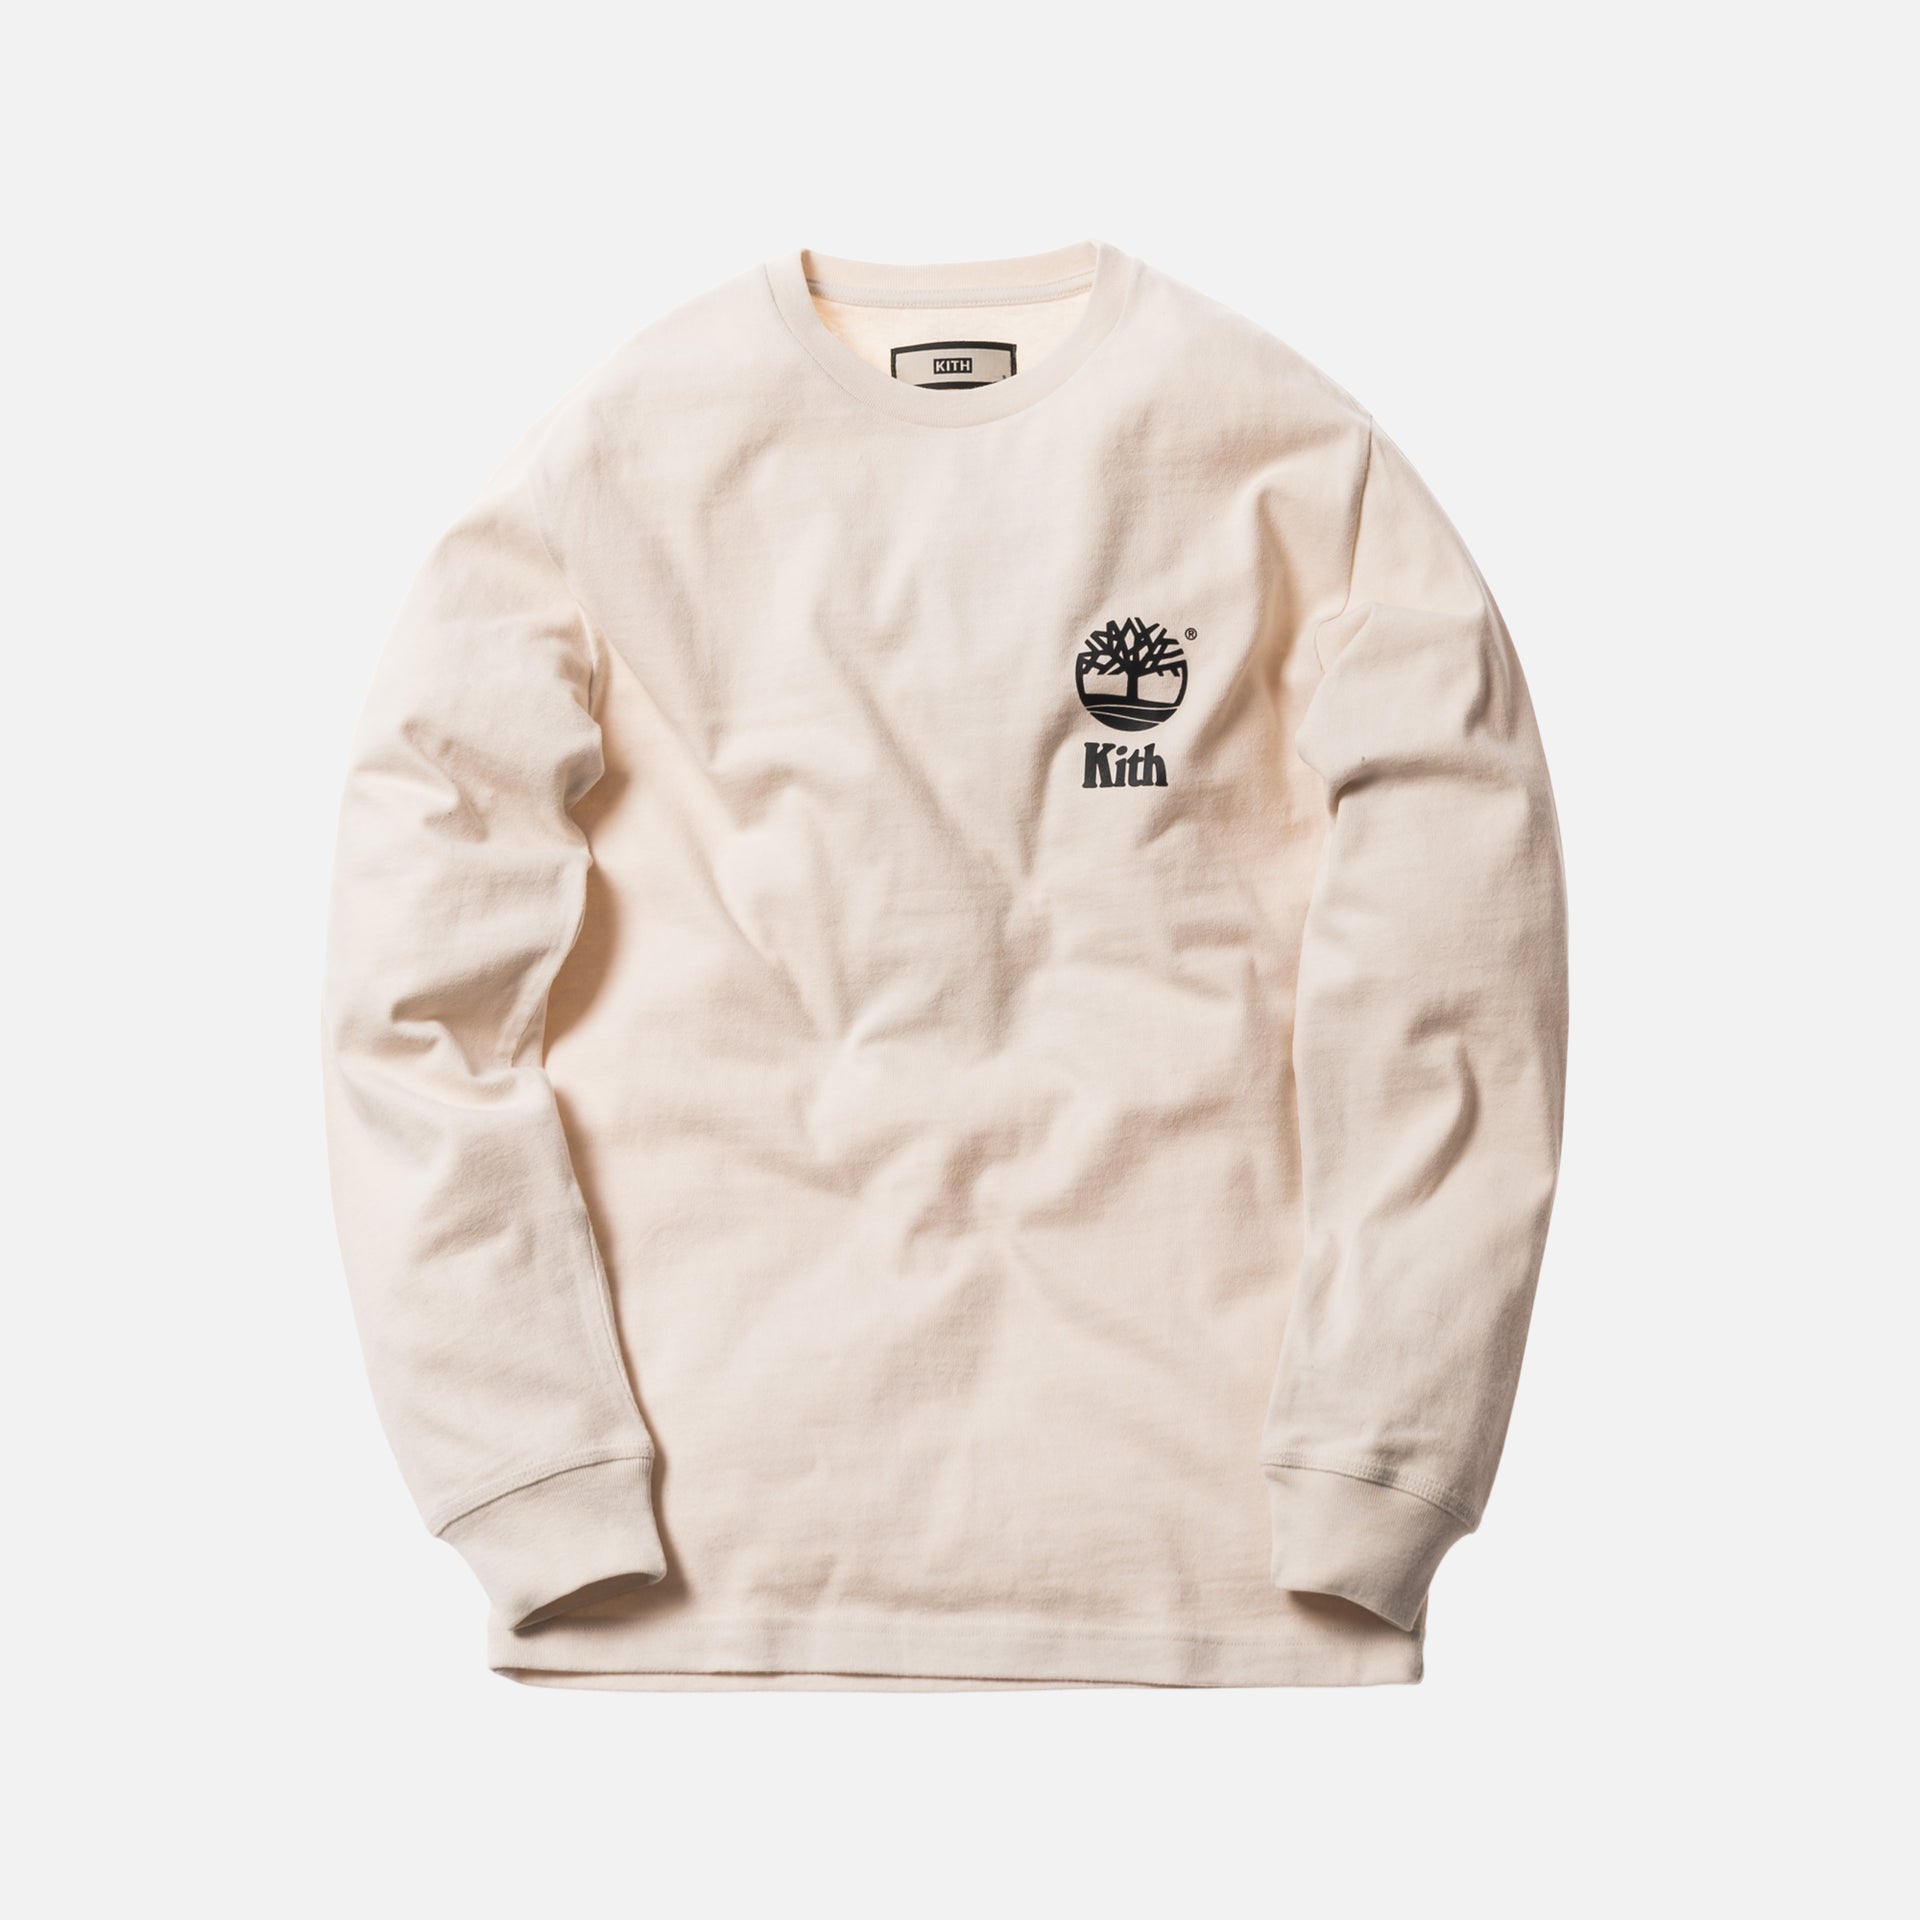 Kith x Timberland L/S Tee - Off-White